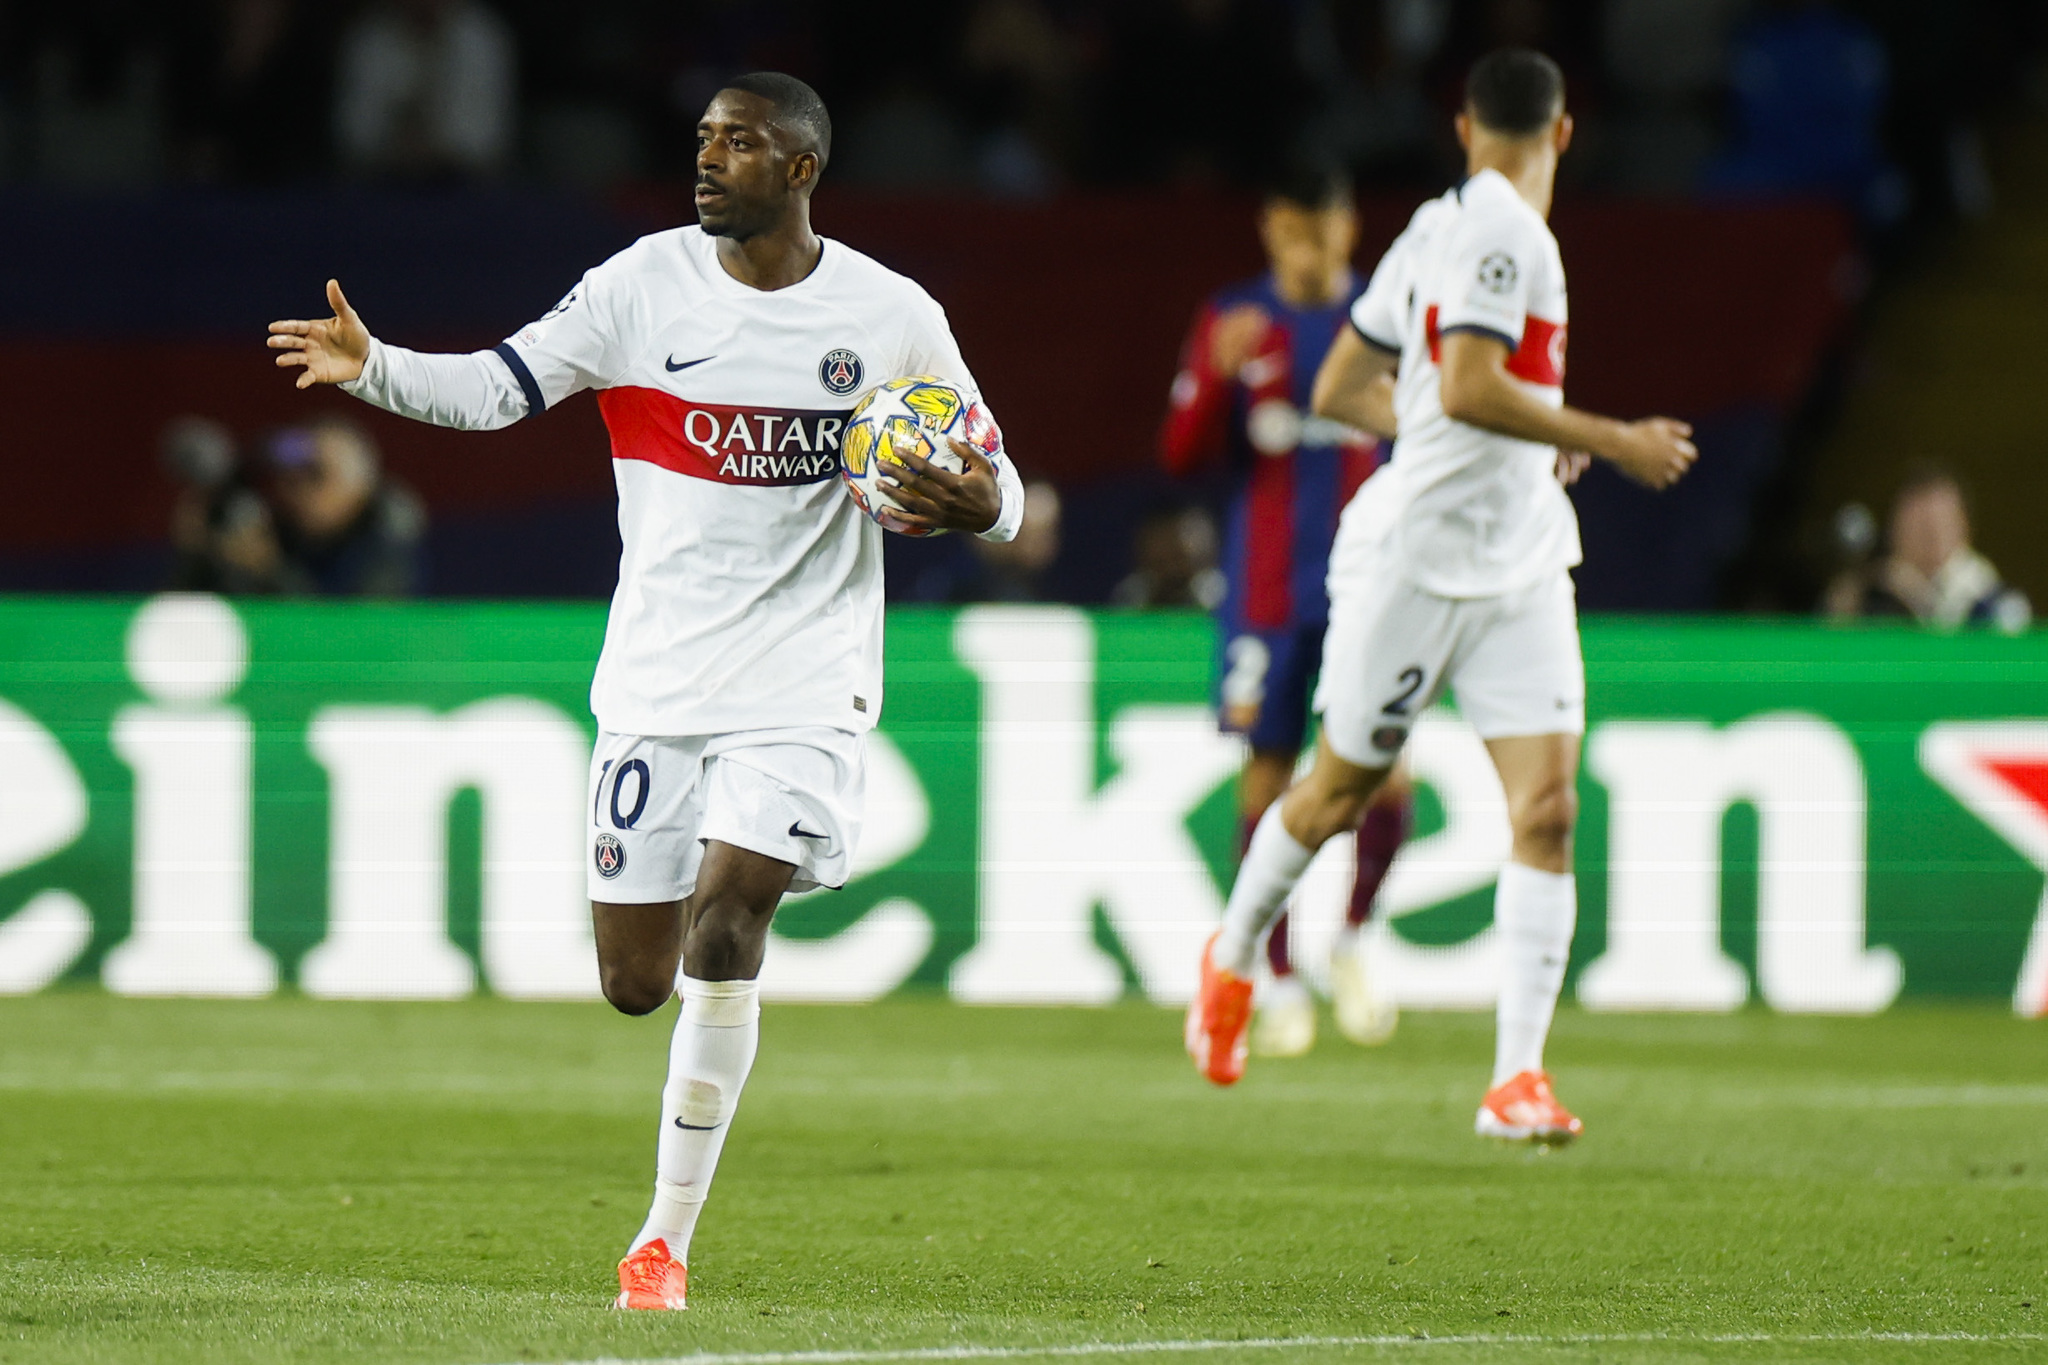 Ousmane Dembele has reignited PSG's hopes after scoring his second goal in as many matches against his former side